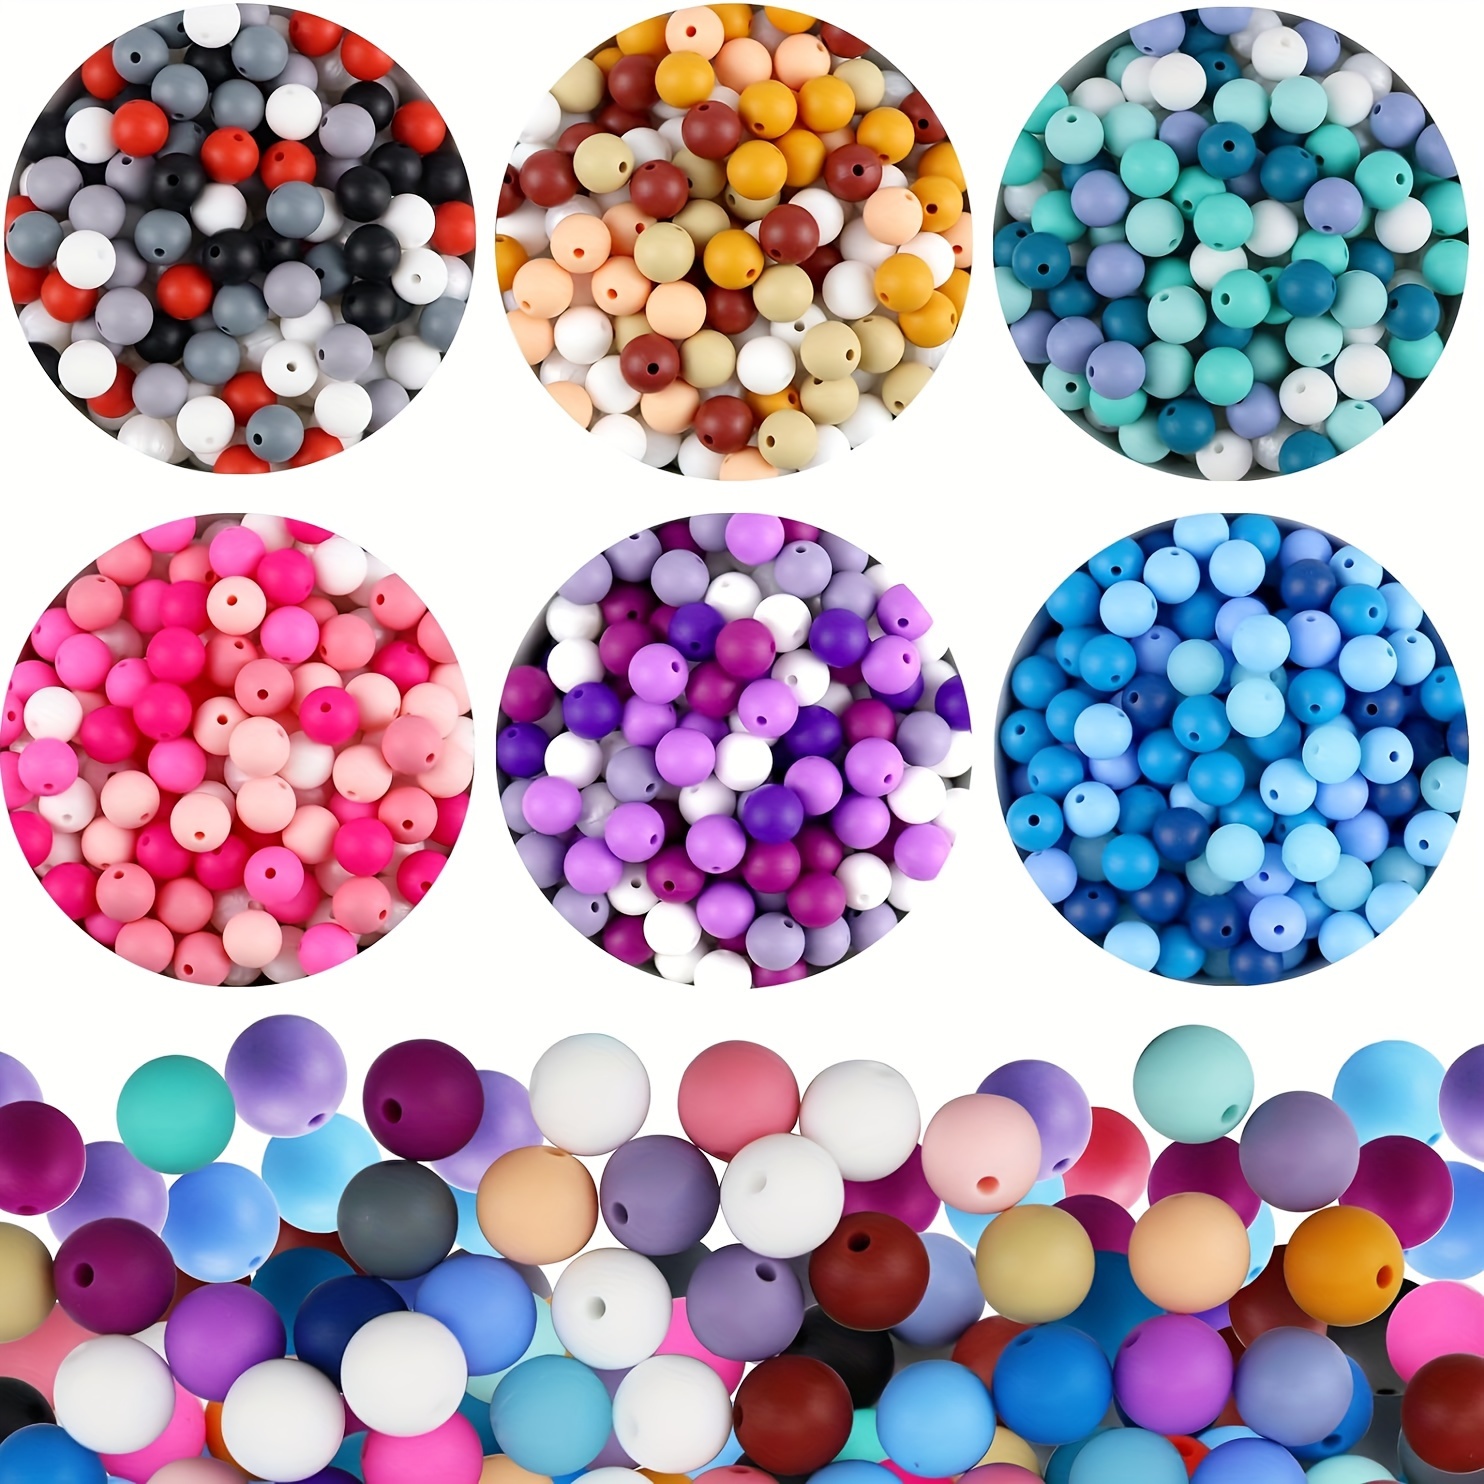 

180pcs Colorful Round Silicone Beads For Jewelry Making Diy Creative Beaded Pen Ornaments, Key Bag Chain Lanyard, Bracelet Decorative Accessories